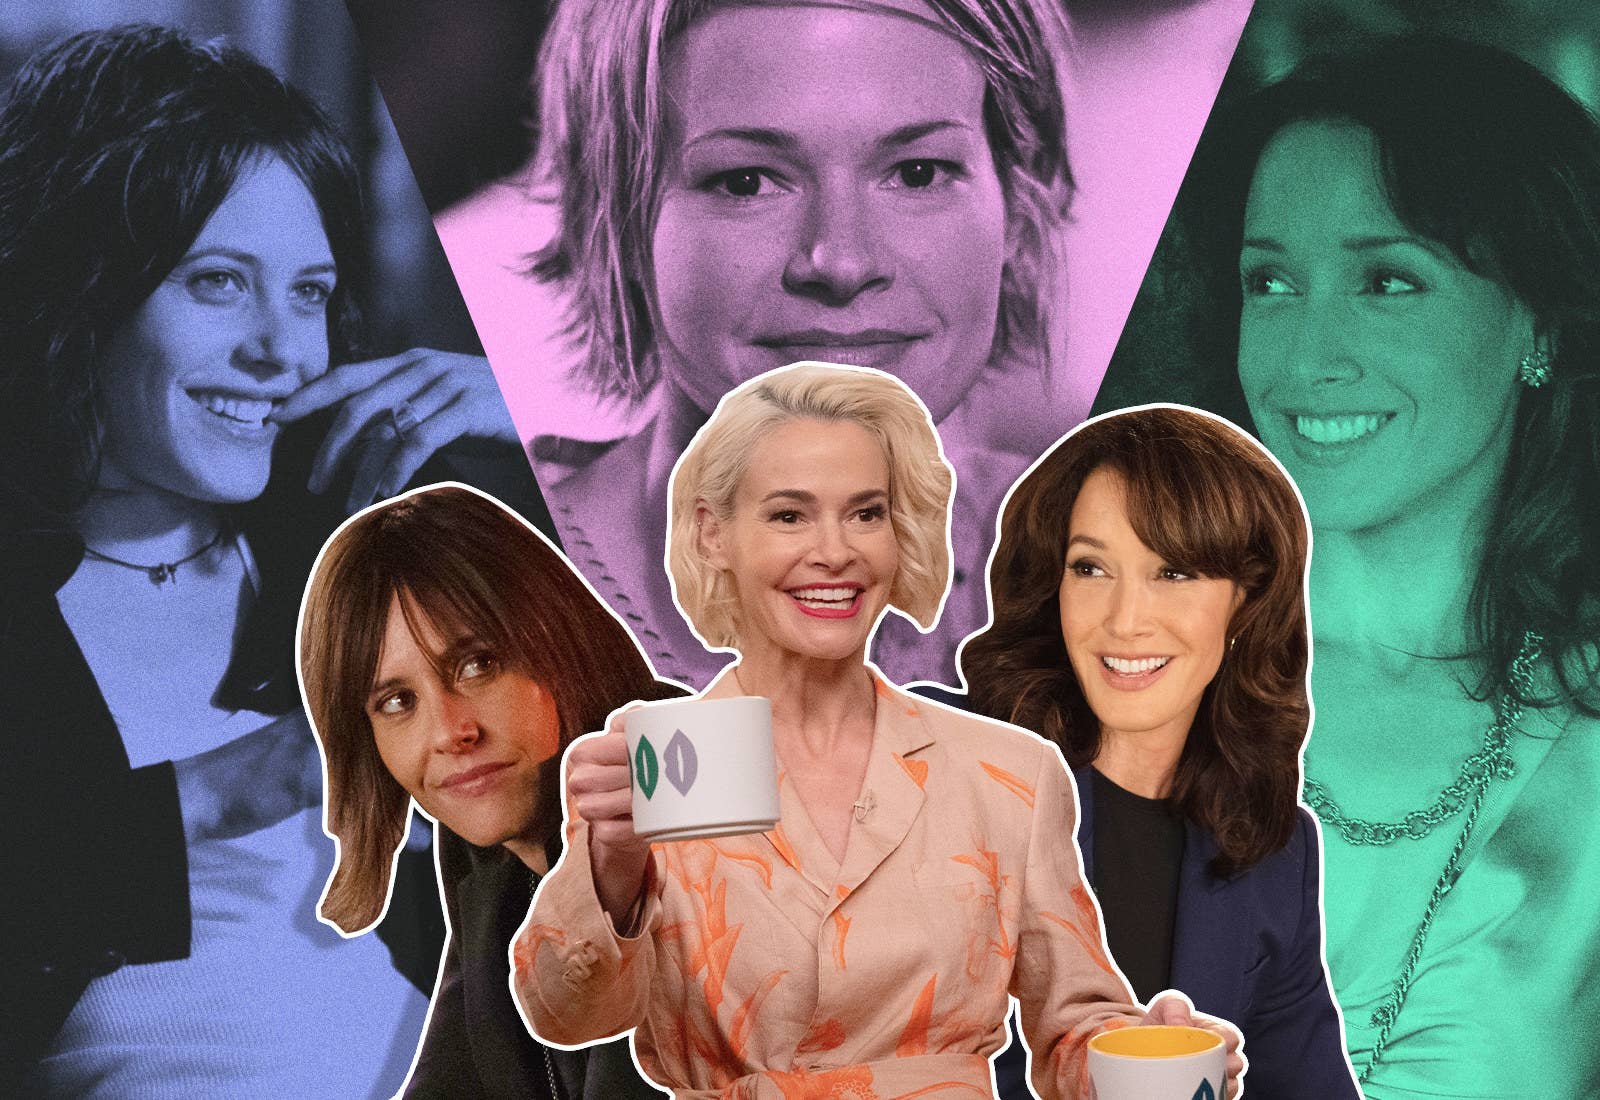 Does 'The L Word' Appeal to Queer Audiences Today?